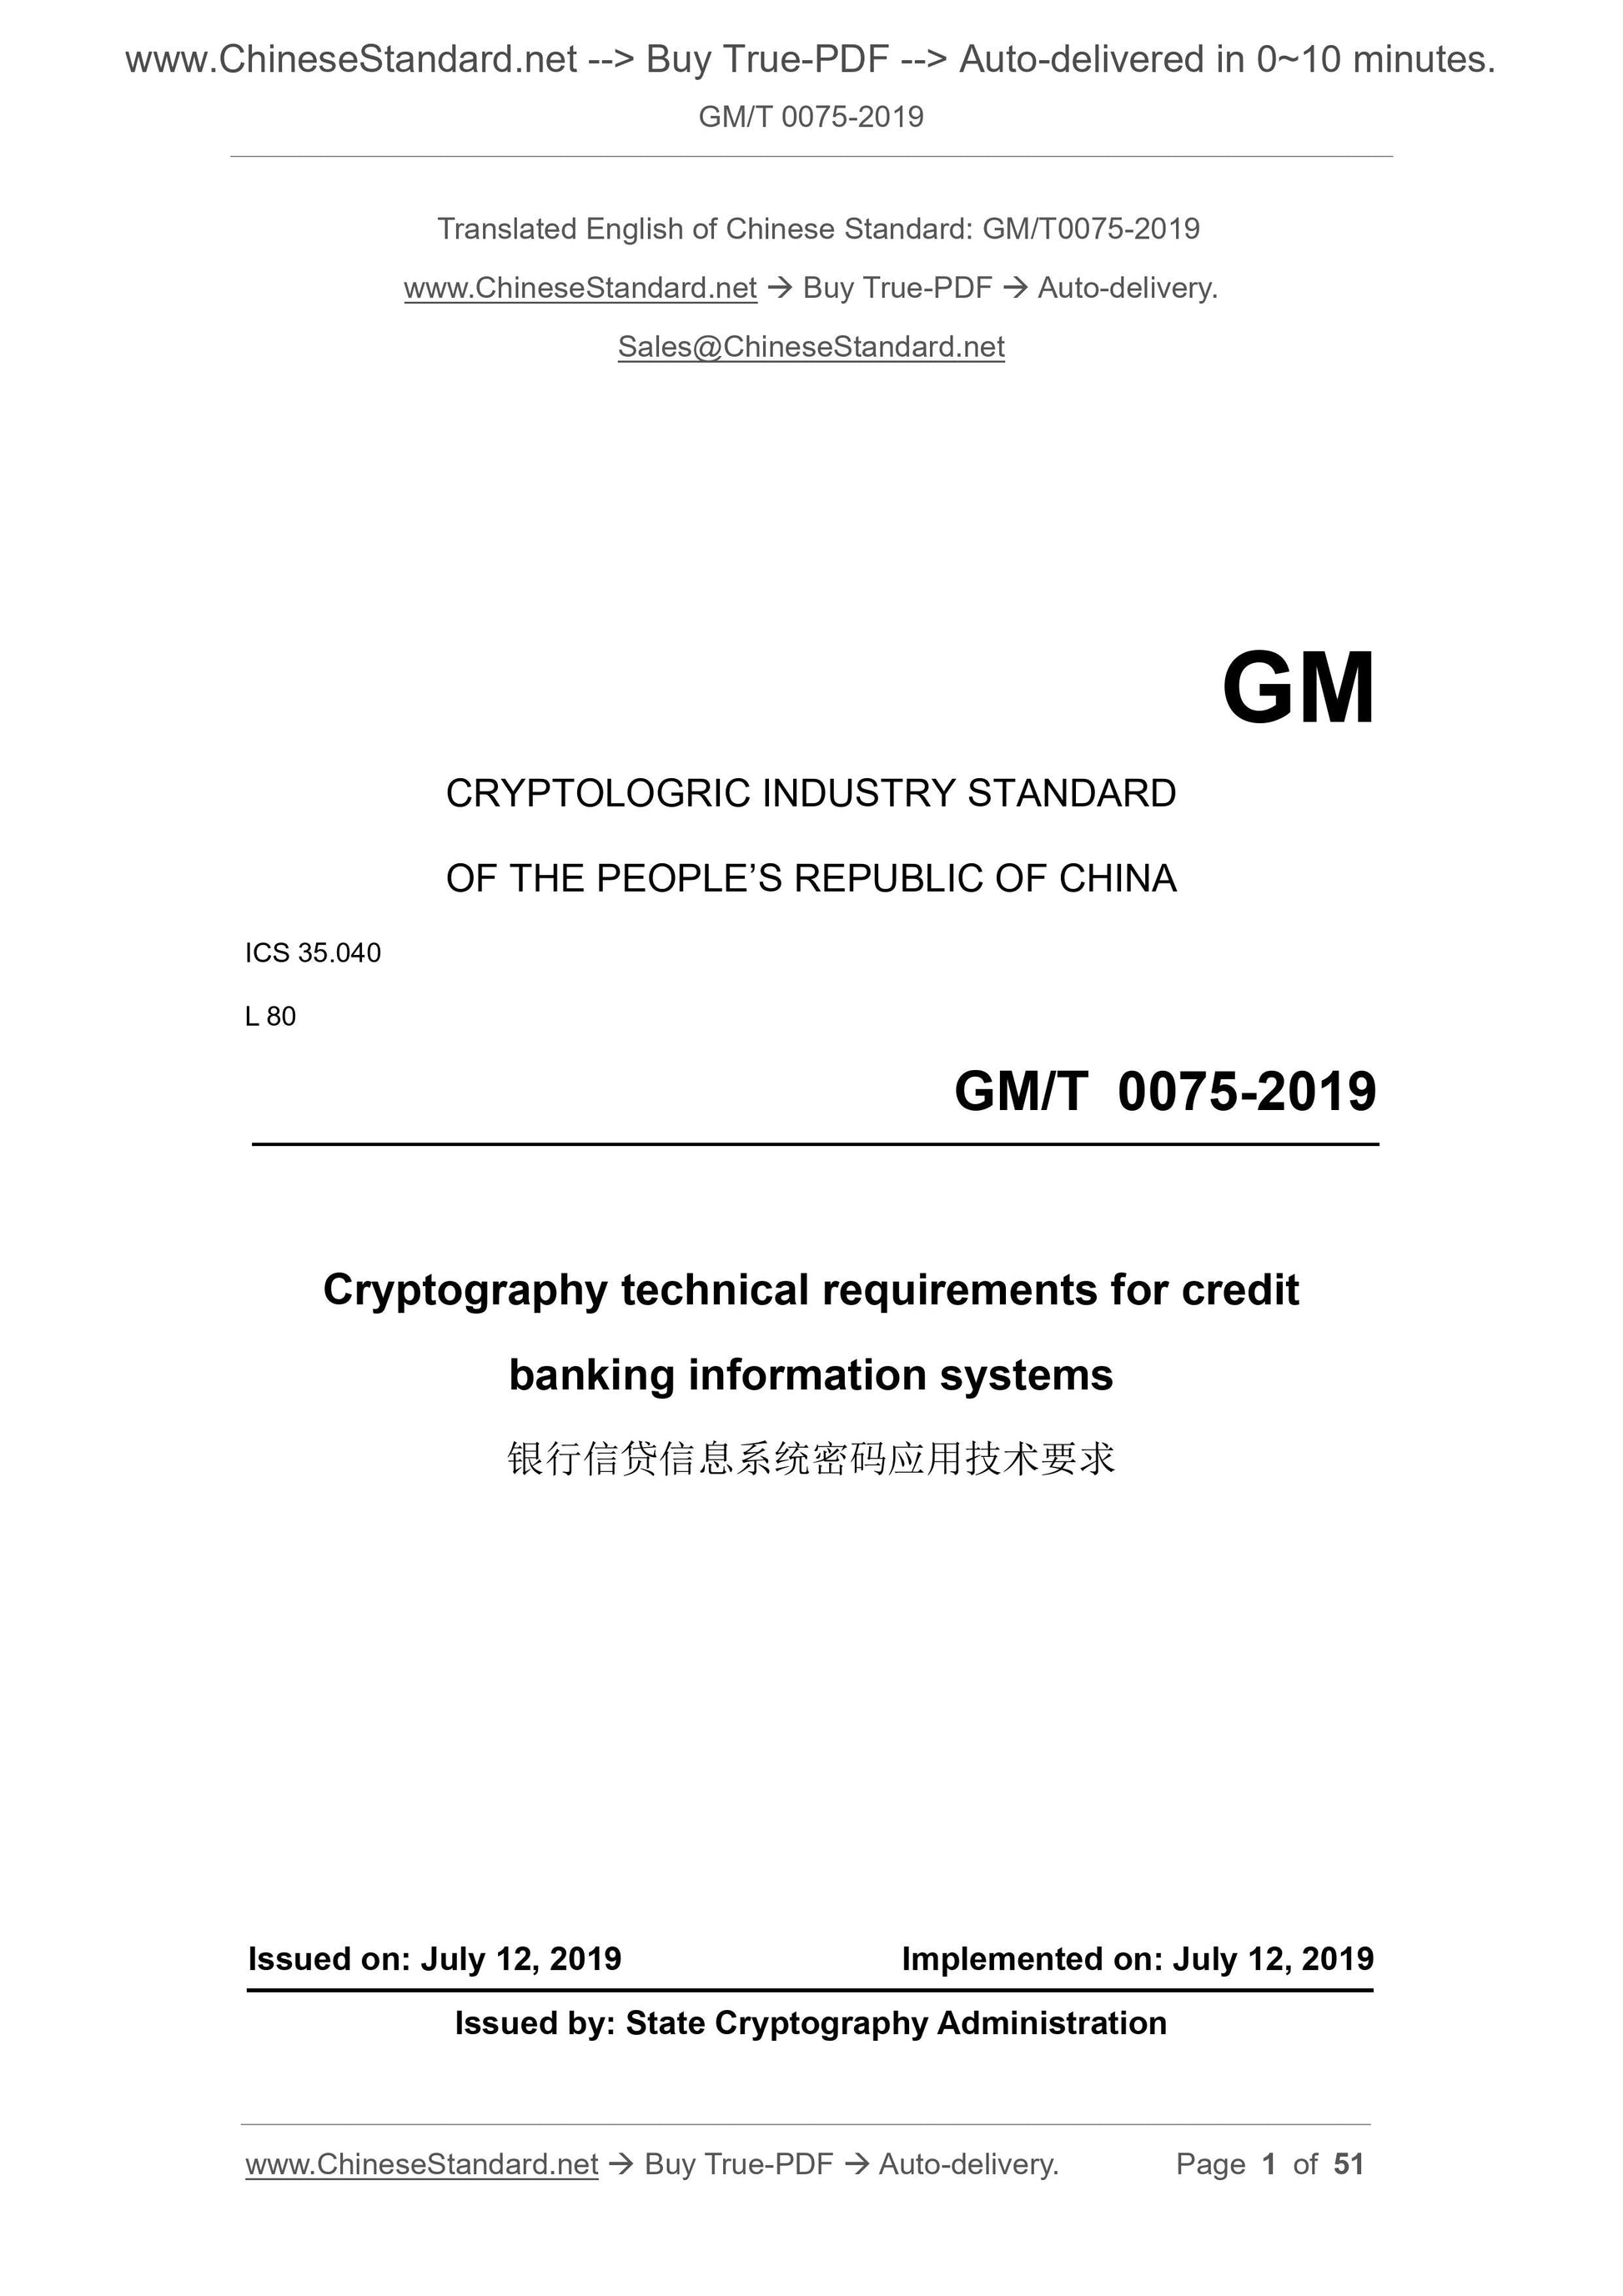 GM/T 0075-2019 Page 1